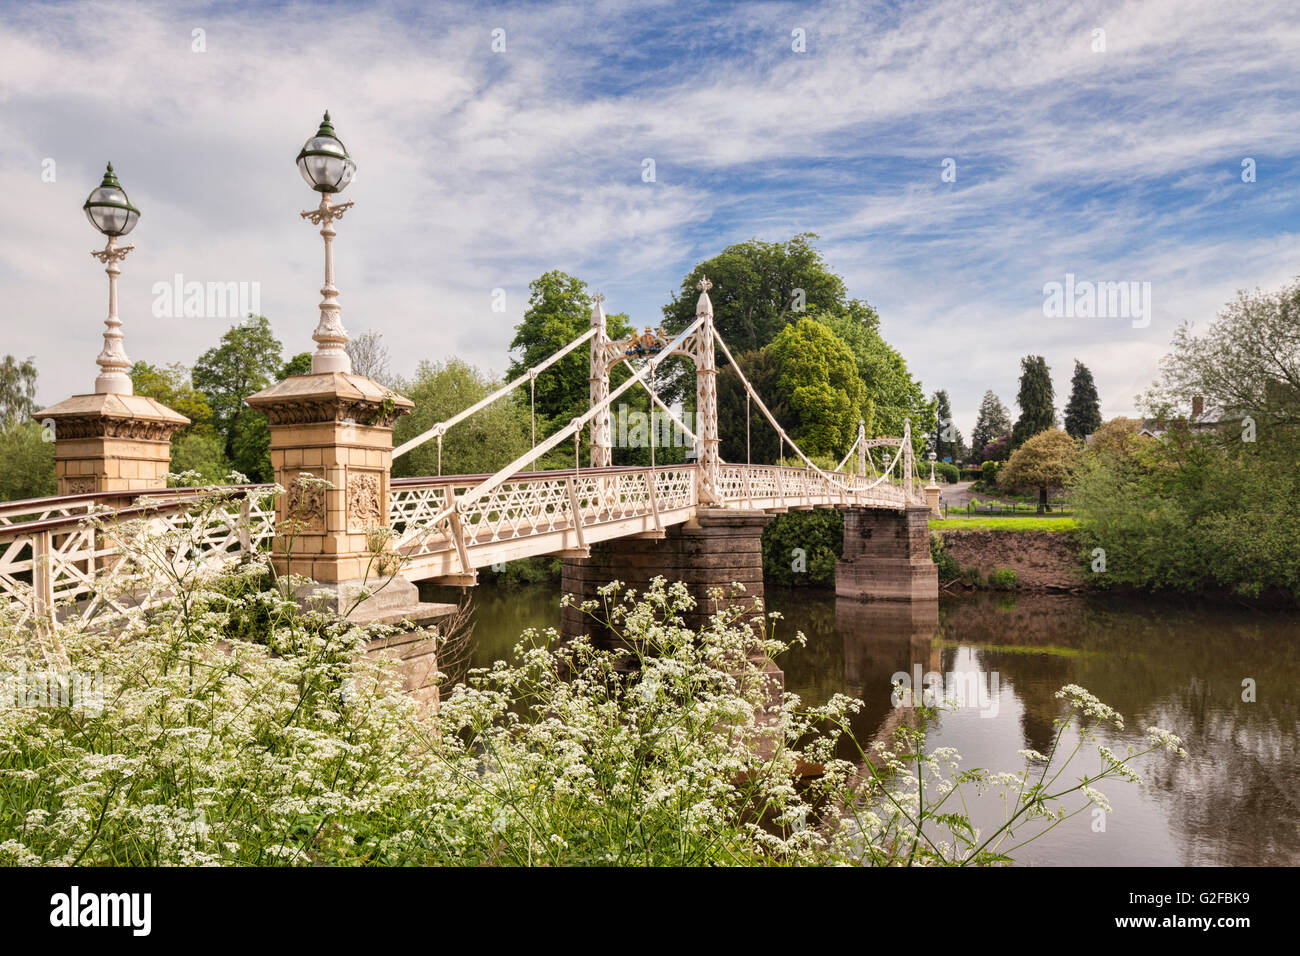 Victoria Bridge, a footbridge over the River Wye in Hereford, with Cow Parsley (Anthriscus Sylvestris) in the foreground, Herefo Stock Photo